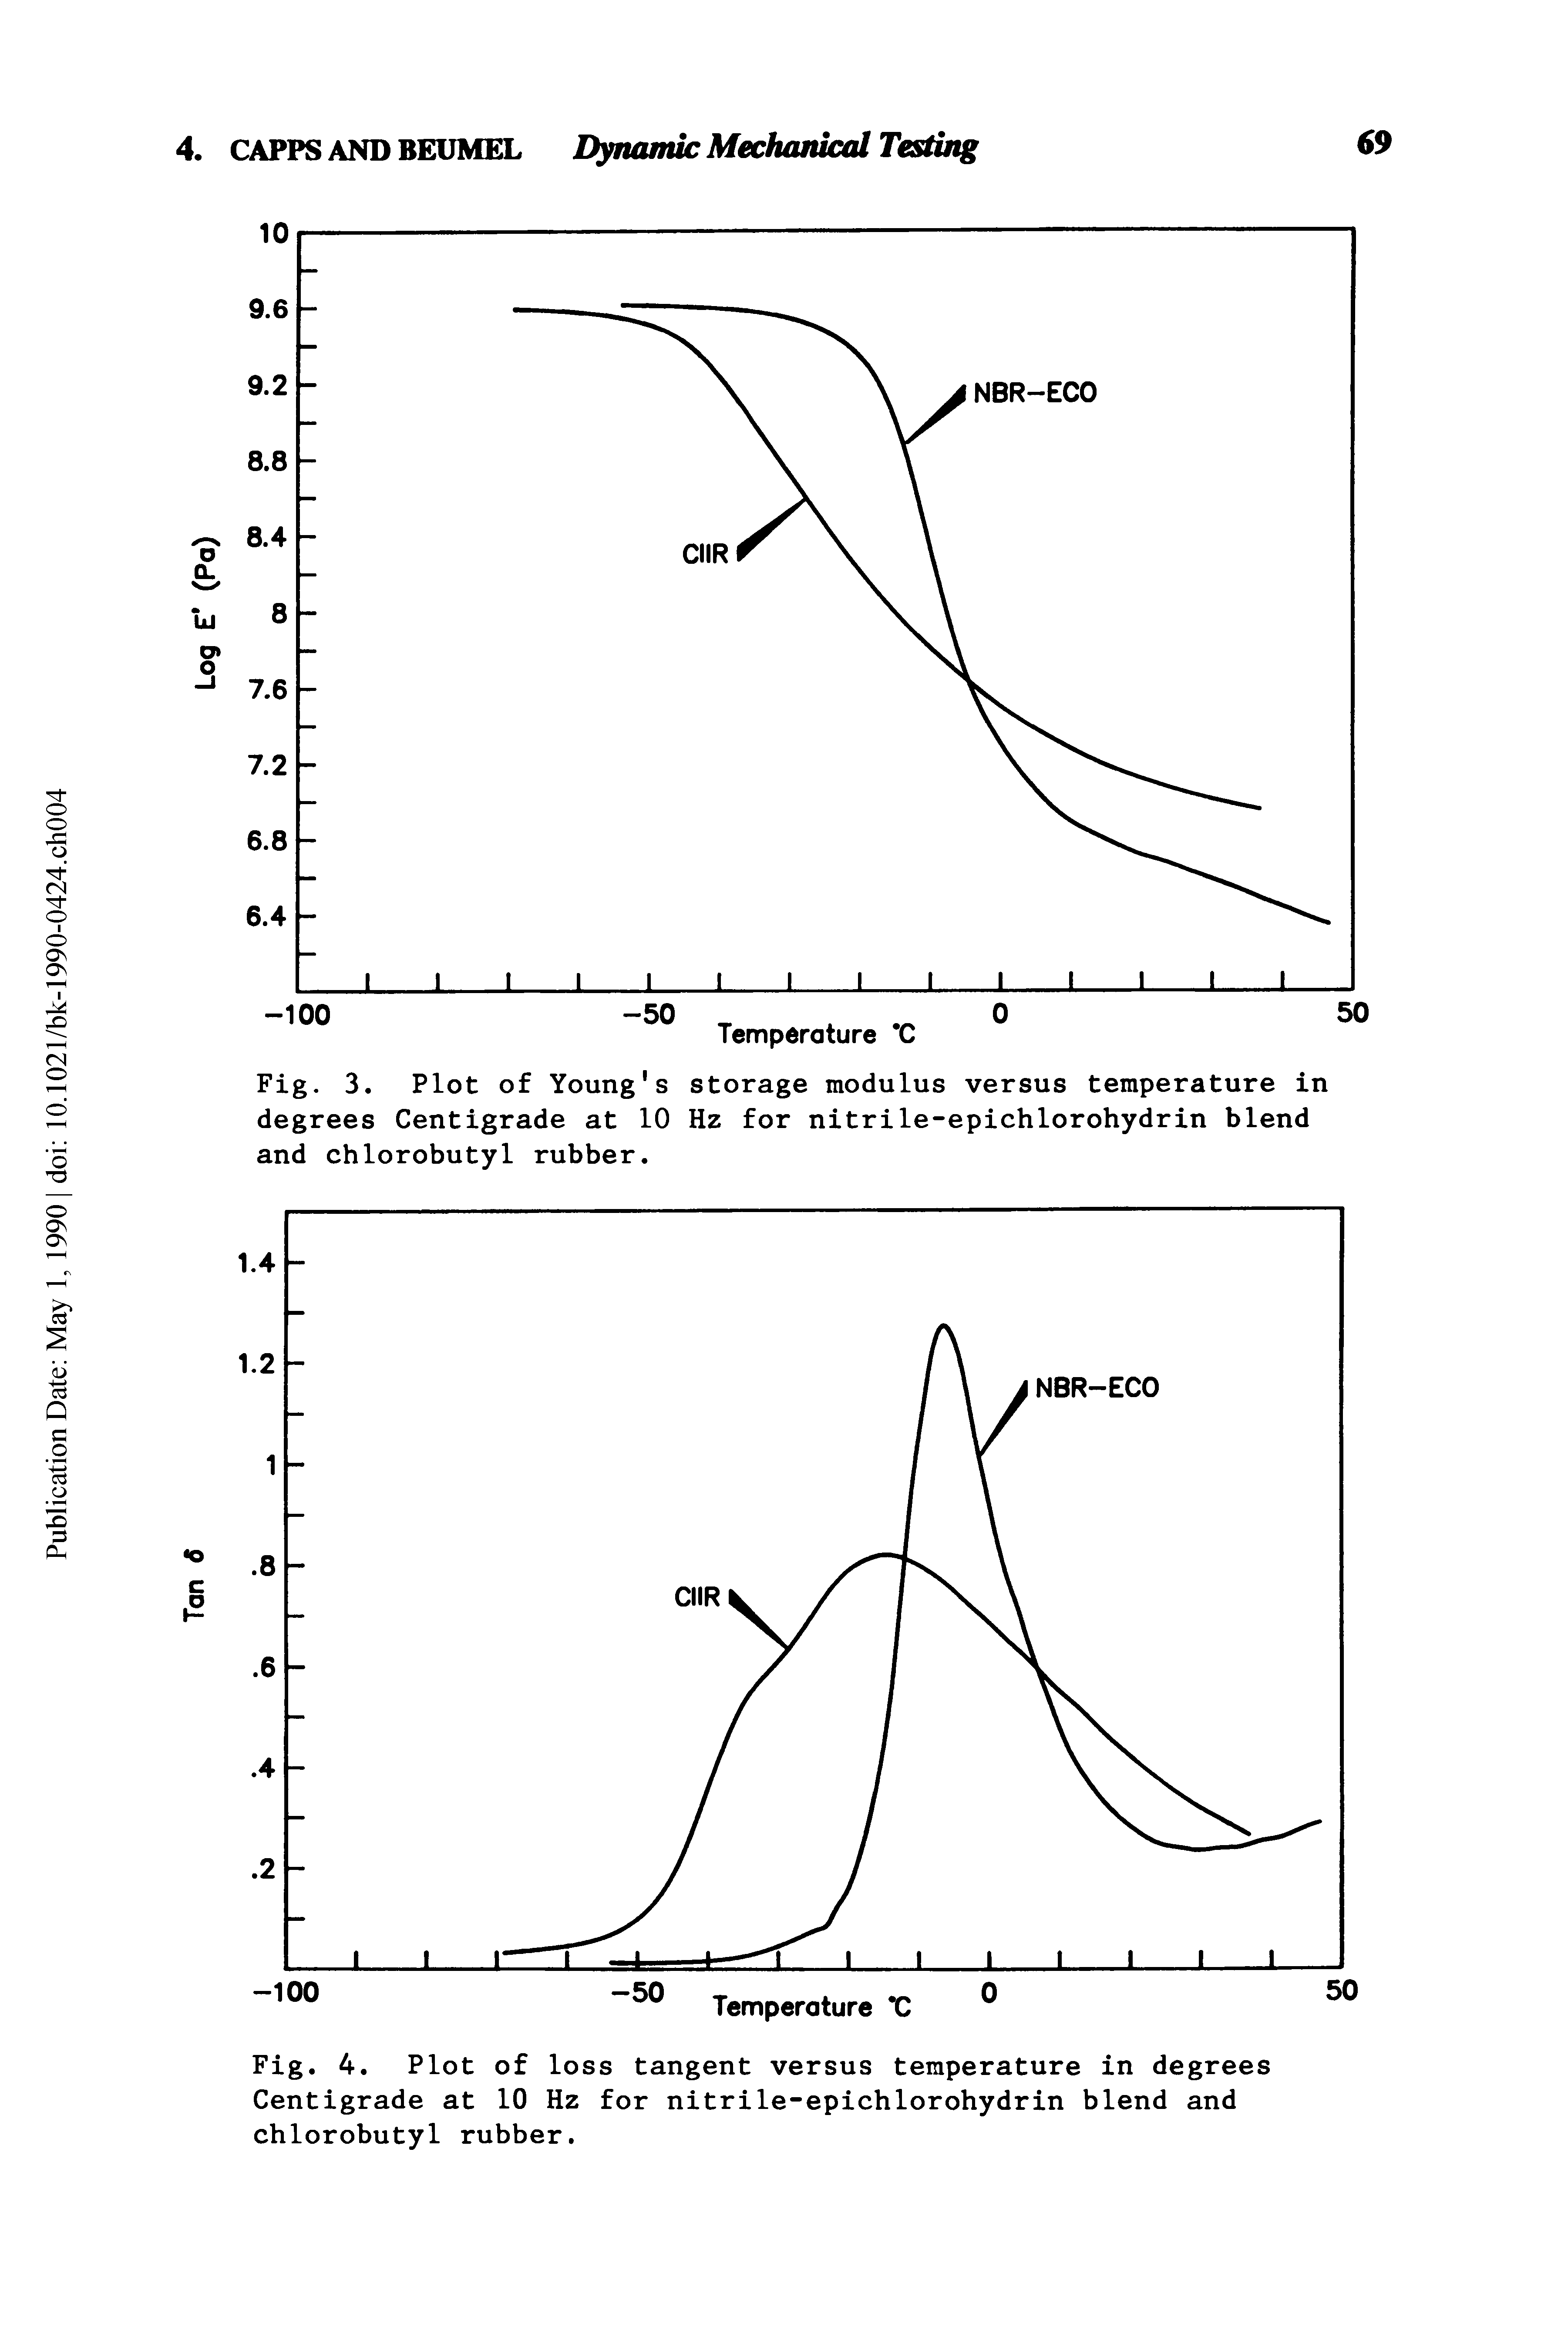 Fig. 3. Plot of Young s storage modulus versus temperature in degrees Centigrade at 10 Hz for nitrile-epichlorohydrin blend and chlorobutyl rubber.